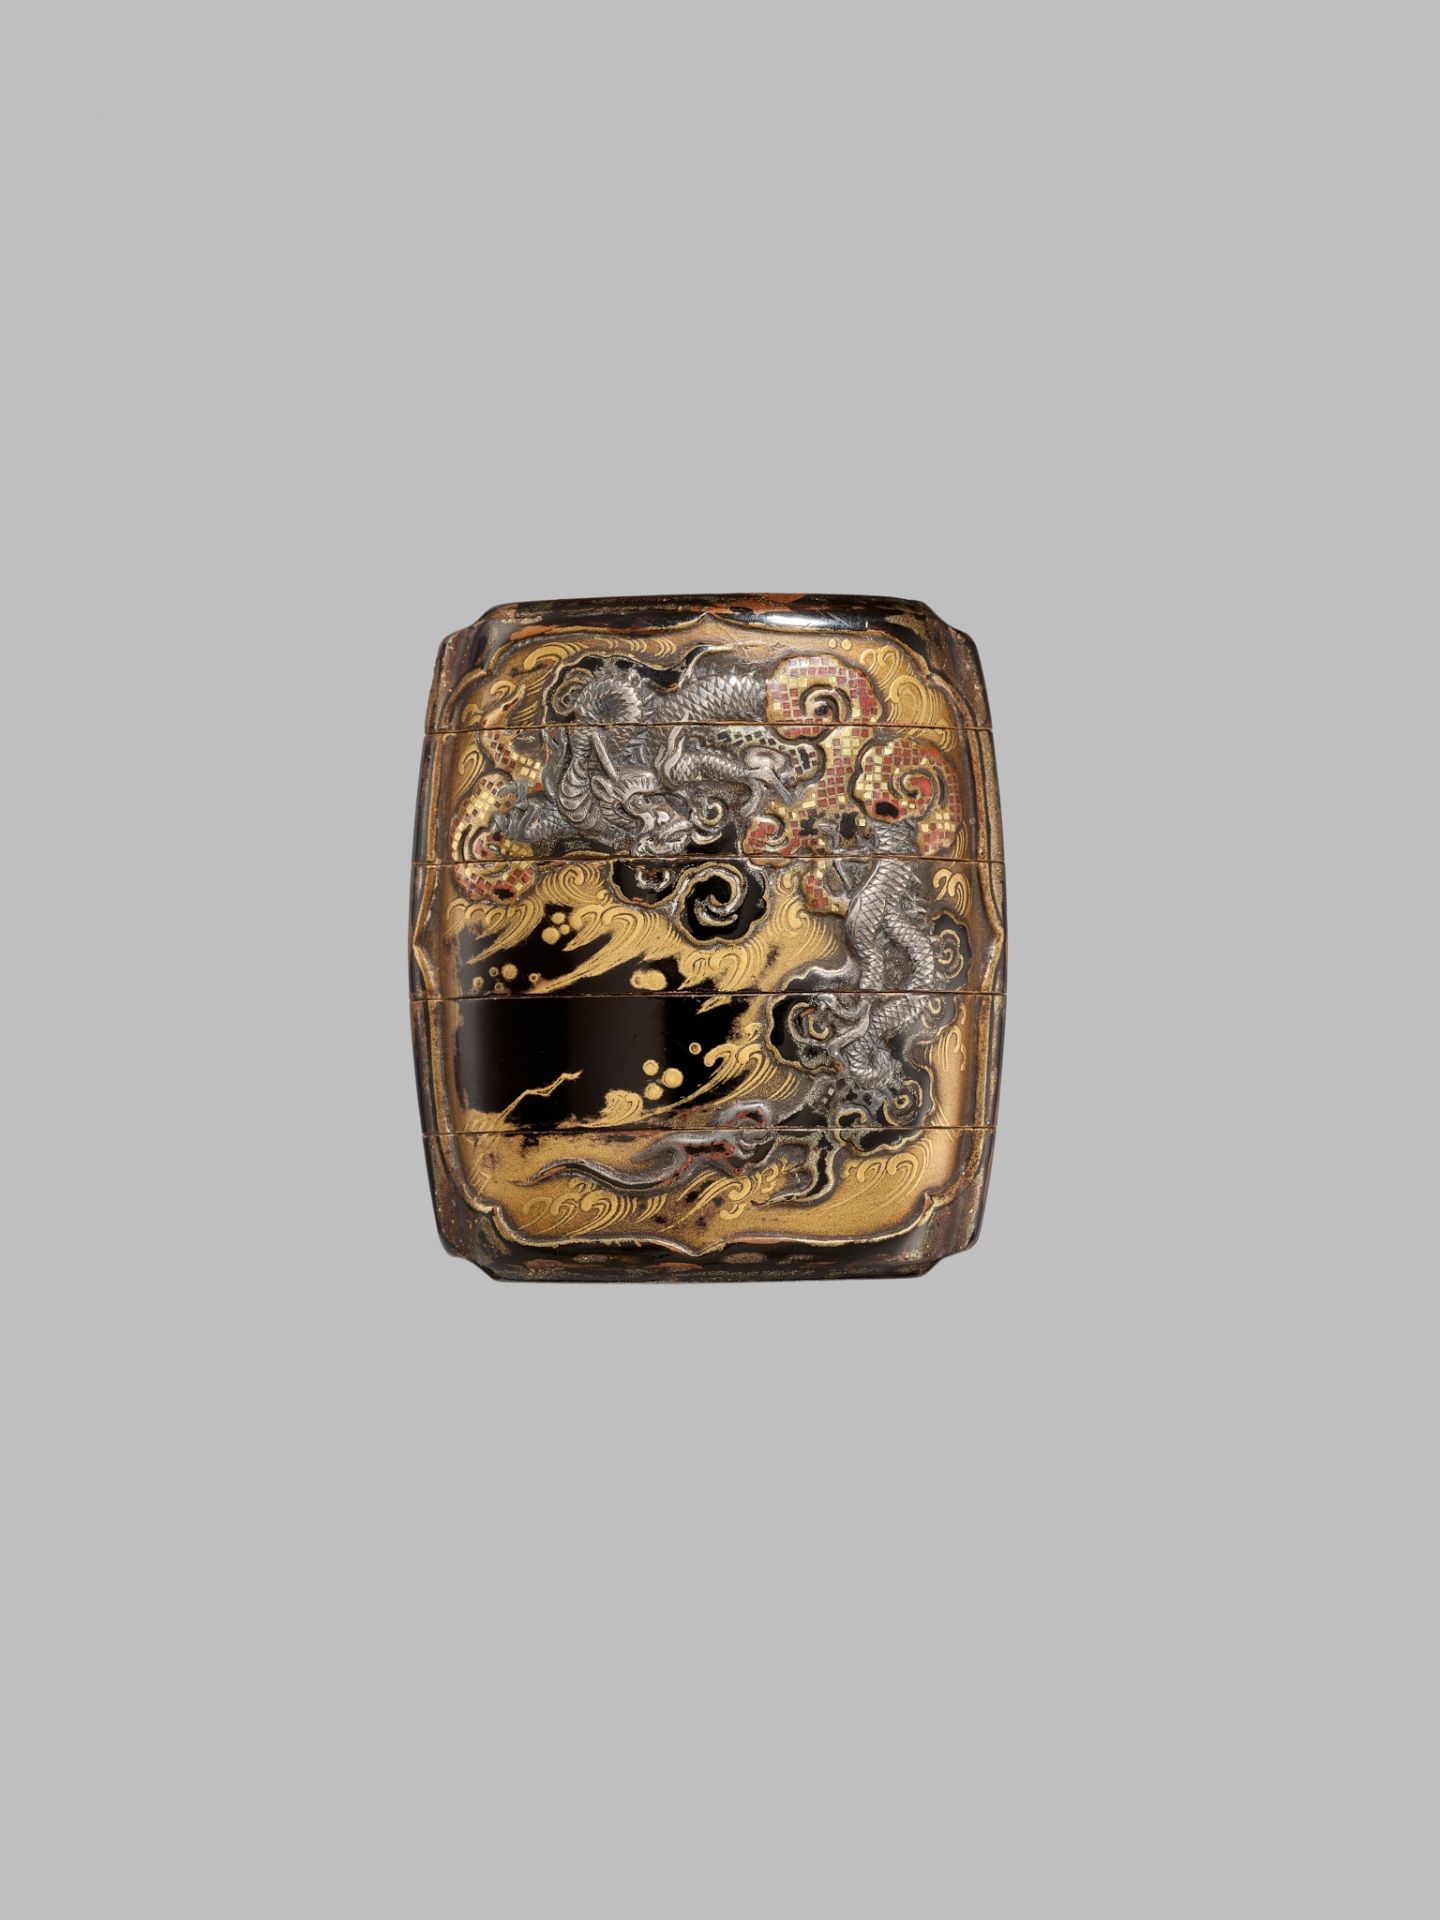 A FINE SILVER-INLAID FOUR-CASE LACQUER INRO DEPICTING A TIGER AND DRAGON - Image 2 of 6